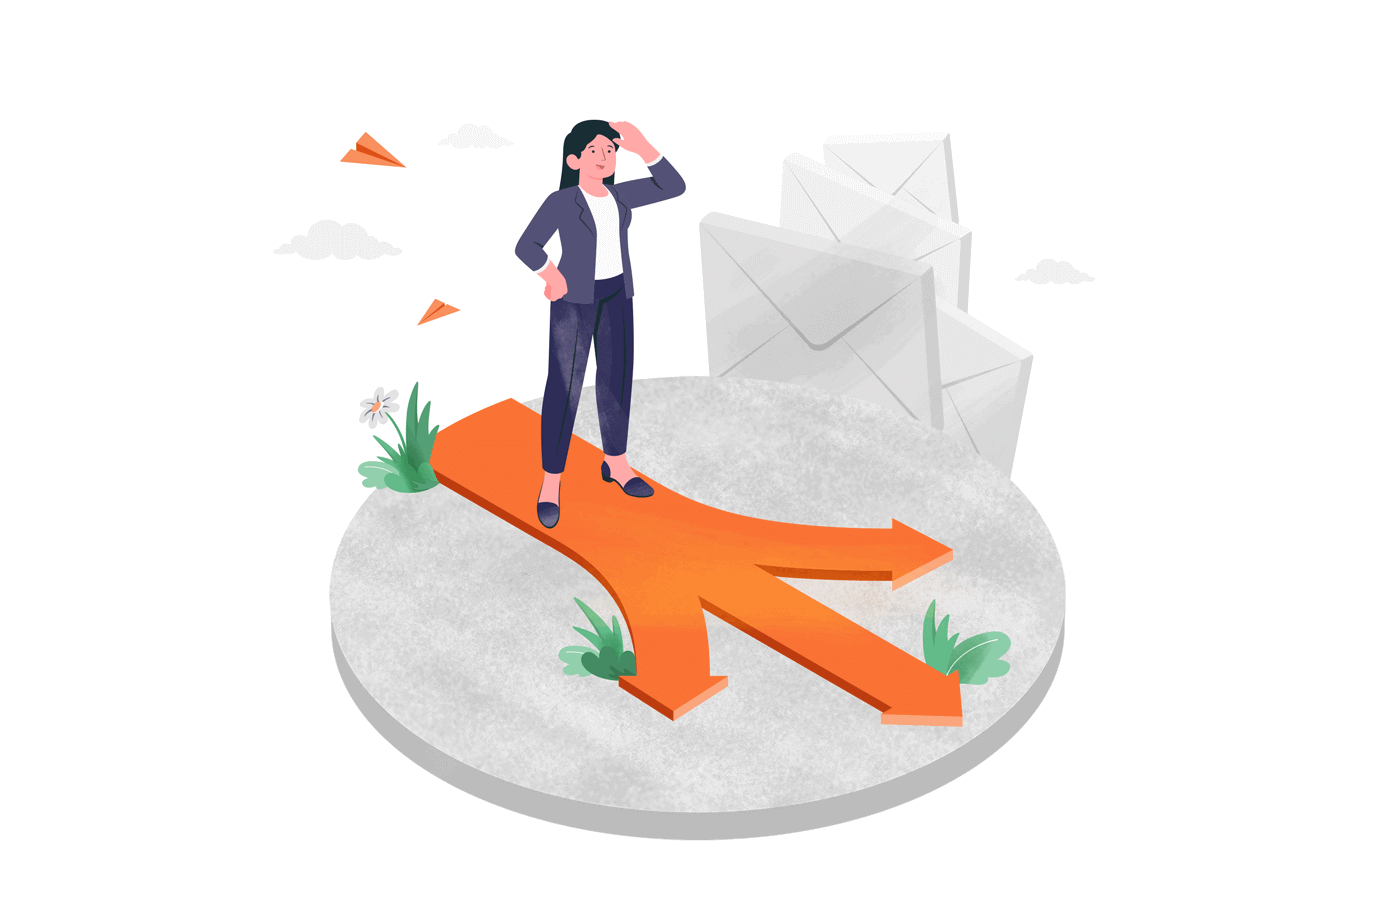 The 6 best free email marketing services in 2024